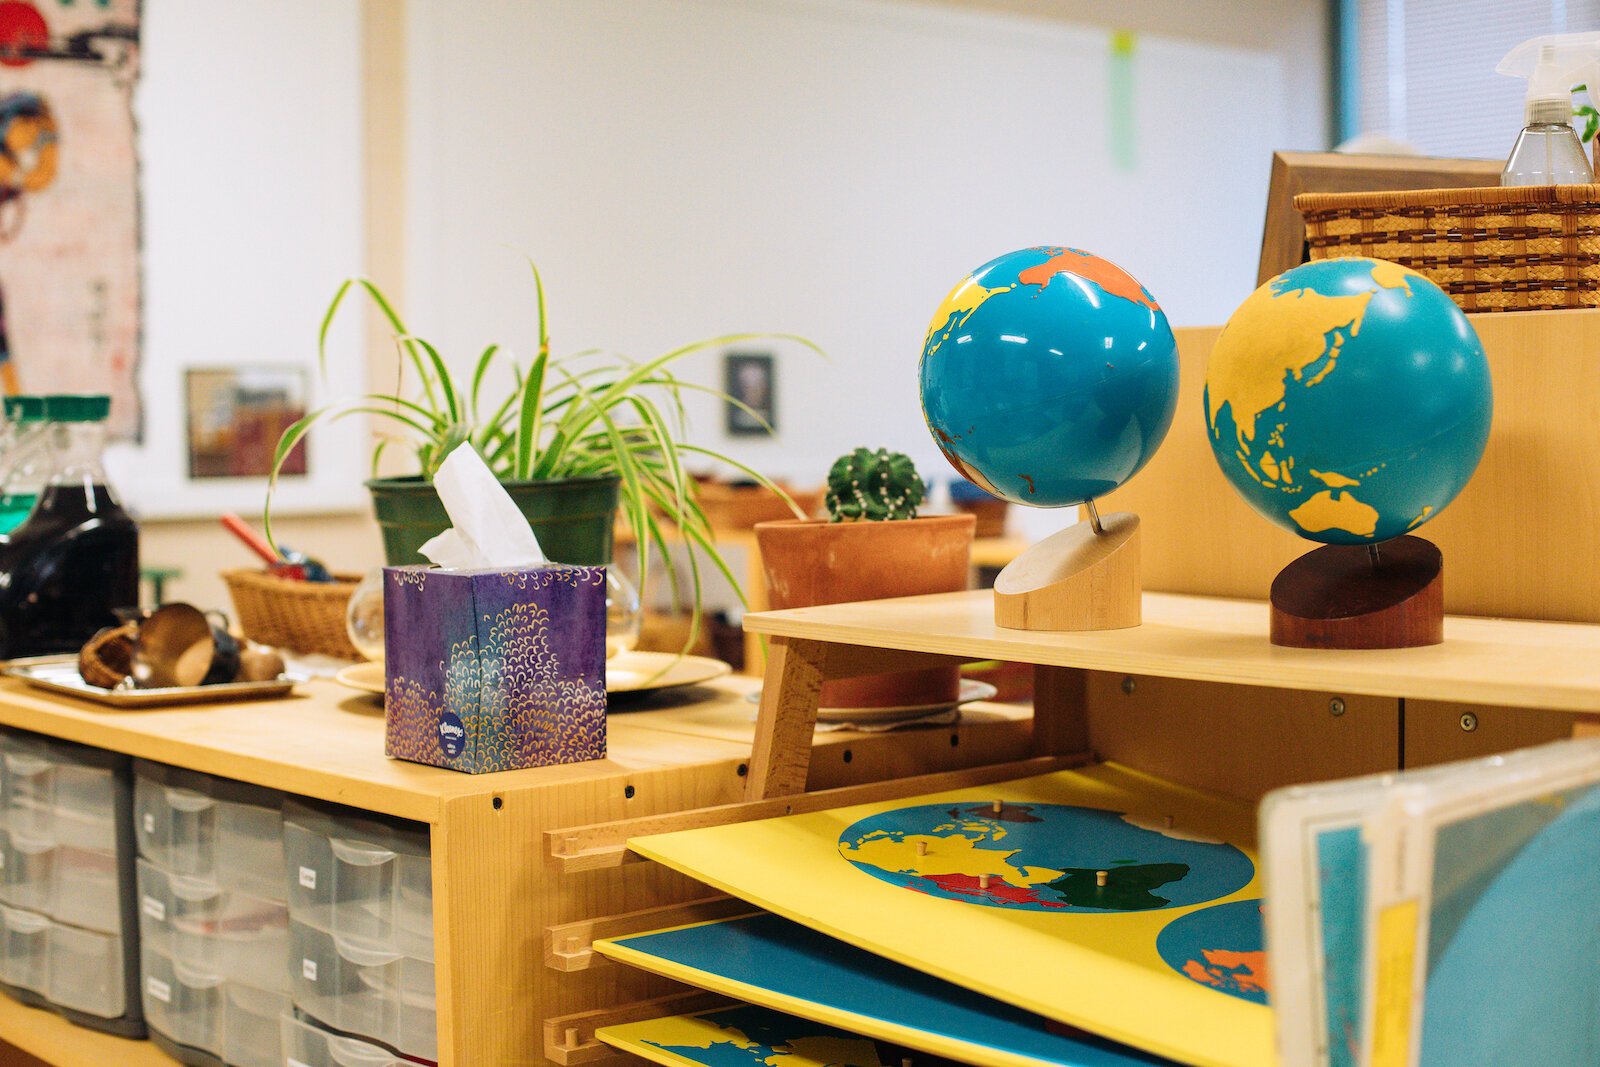 Montessori classrooms are full of natural materials such as wood, metal, and linen. Activities within the room are meant to concentrate and investigate purposefully designed activities.